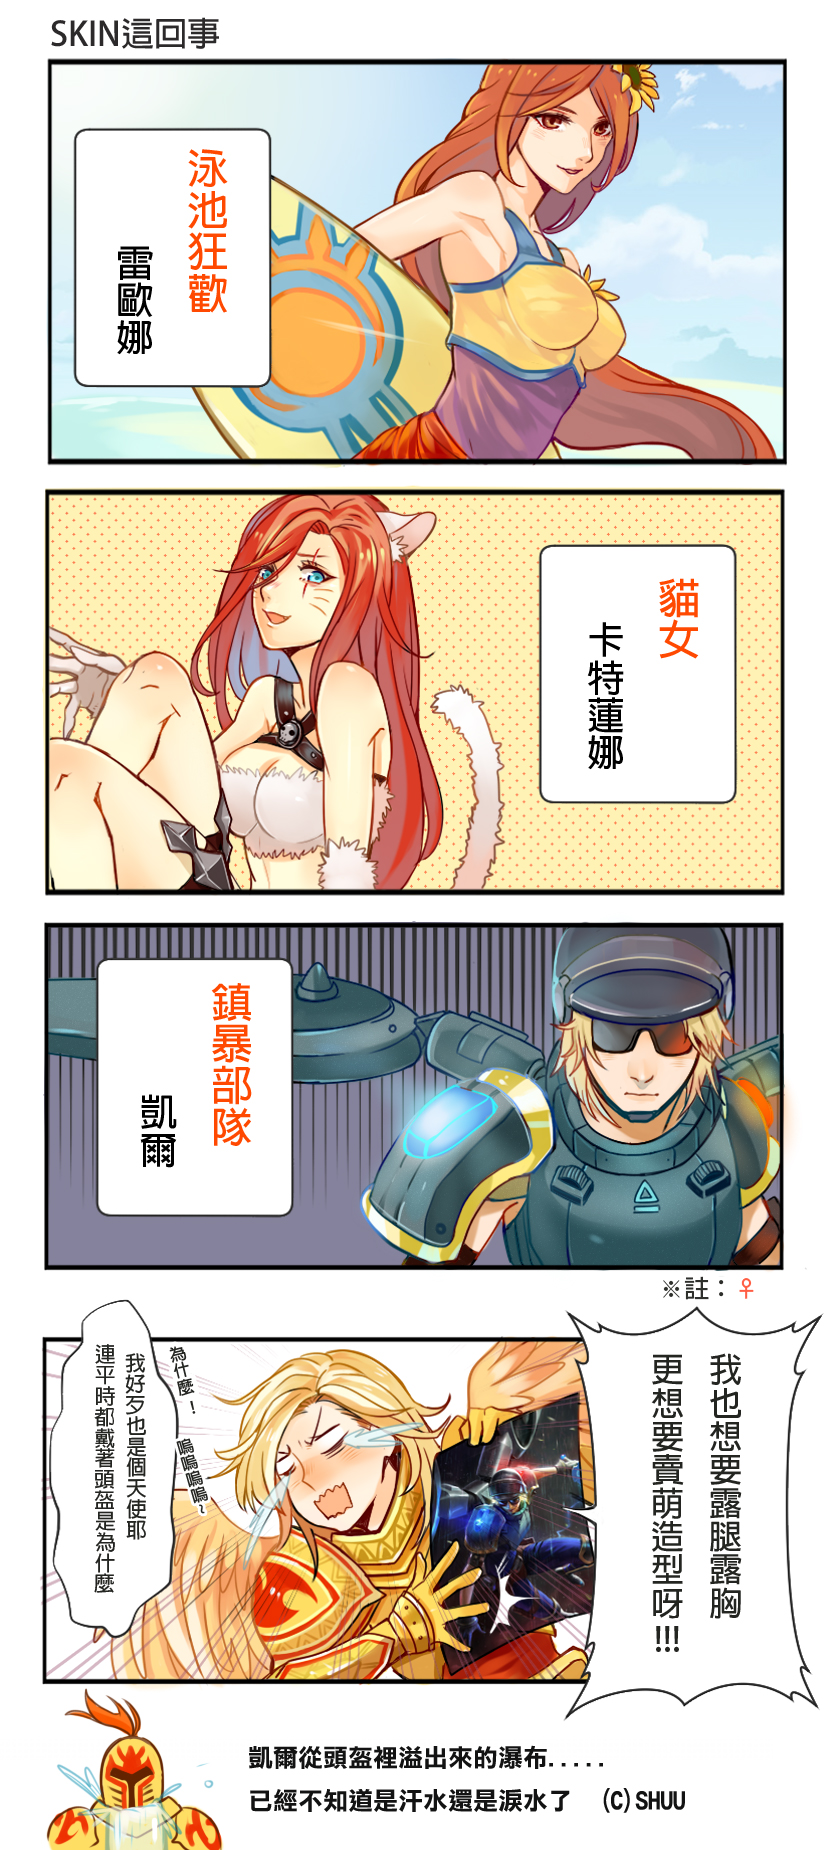 3girls 4koma animal_ears armor armpits blonde_hair blue_eyes brown_eyes brown_hair c0988268800 cat_ears cat_tail chinese comic crying fang hair_ornament helmet highres katarina_du_couteau kayle knife league_of_legends leona_(league_of_legends) looking_at_viewer multiple_girls open_mouth parted_lips redhead scar scar_across_eye sunflower_hair_ornament sunglasses surfboard tail tears throwing_knife wavy_mouth